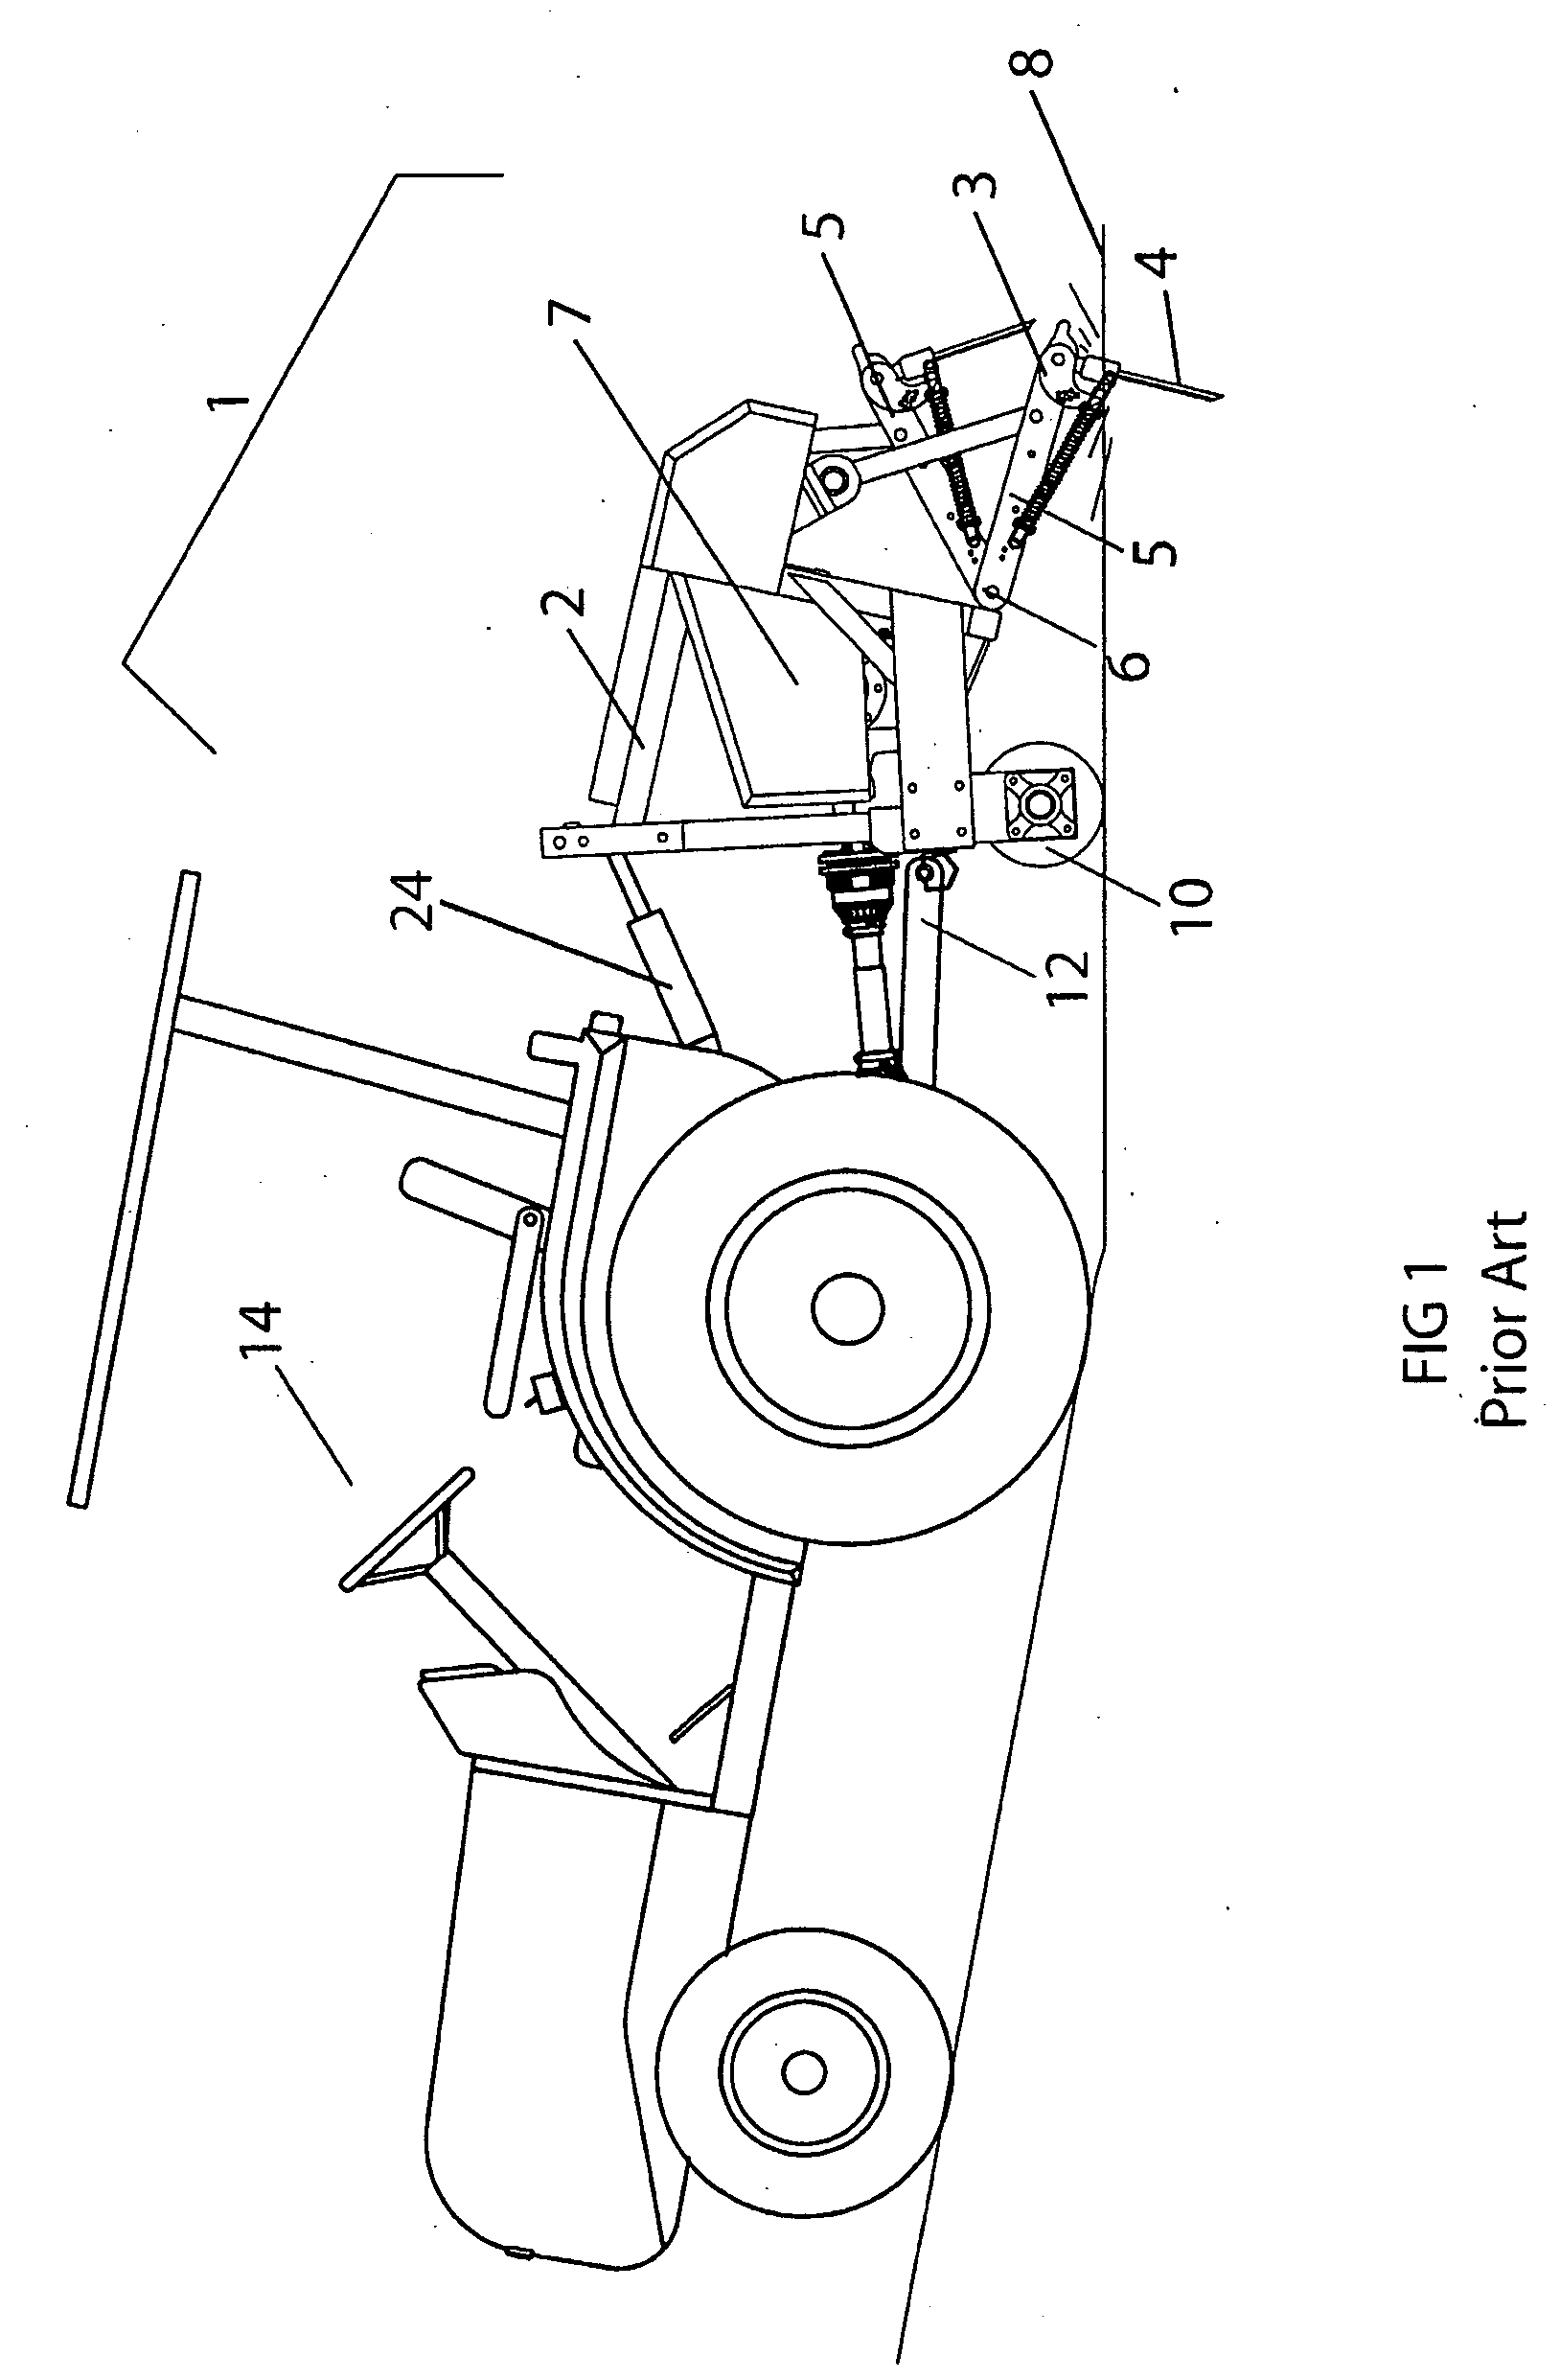 Frame Orientation Control Device for an Aeration Apparatus